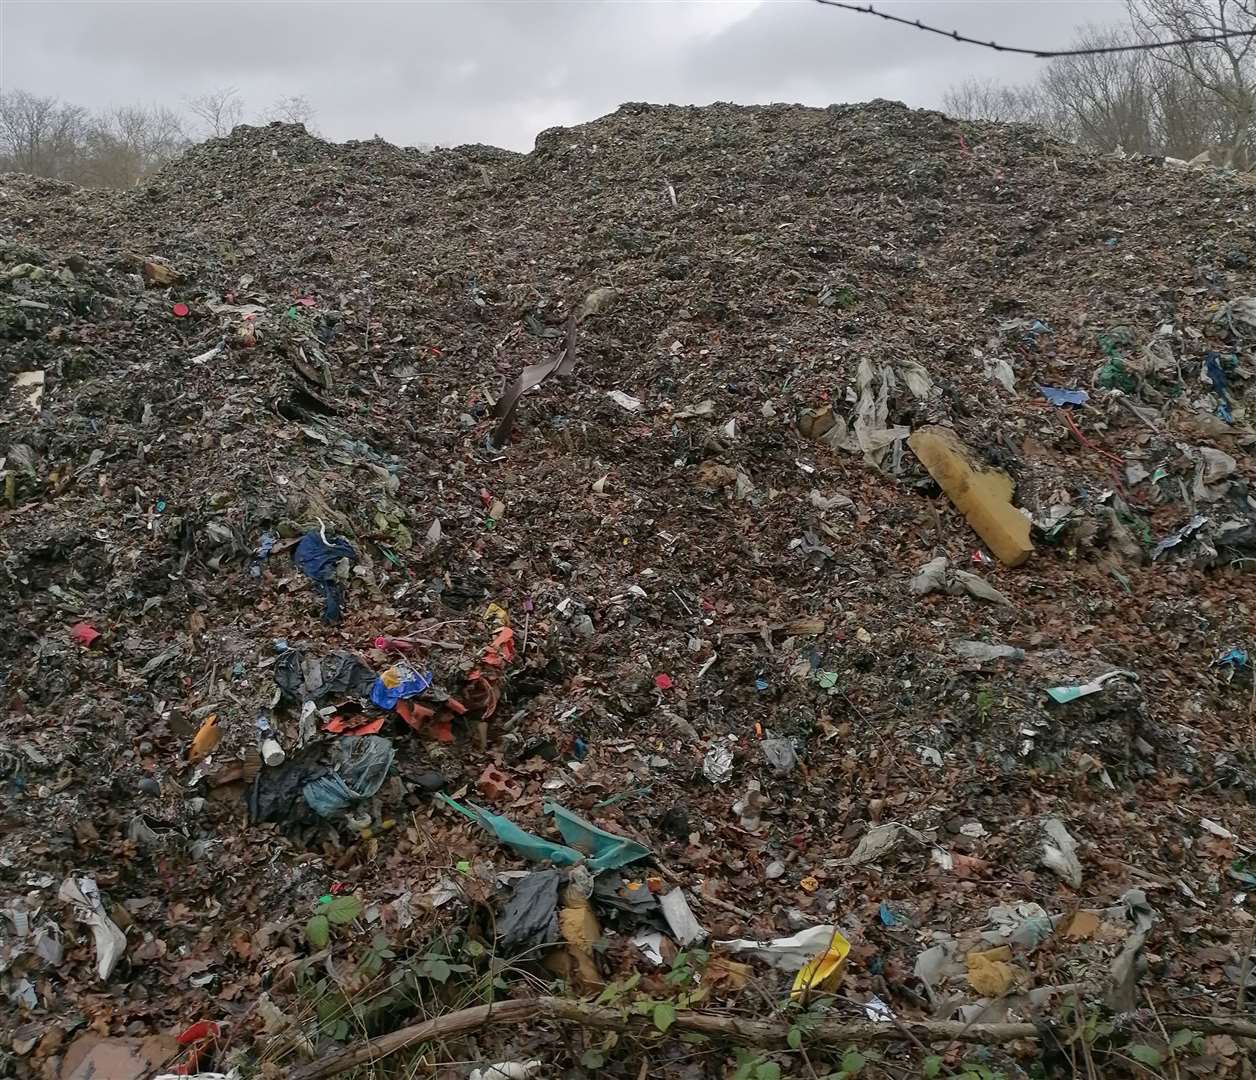 Rubbish is piled 12ft high across acres of Hoad’s Wood, near Ashford